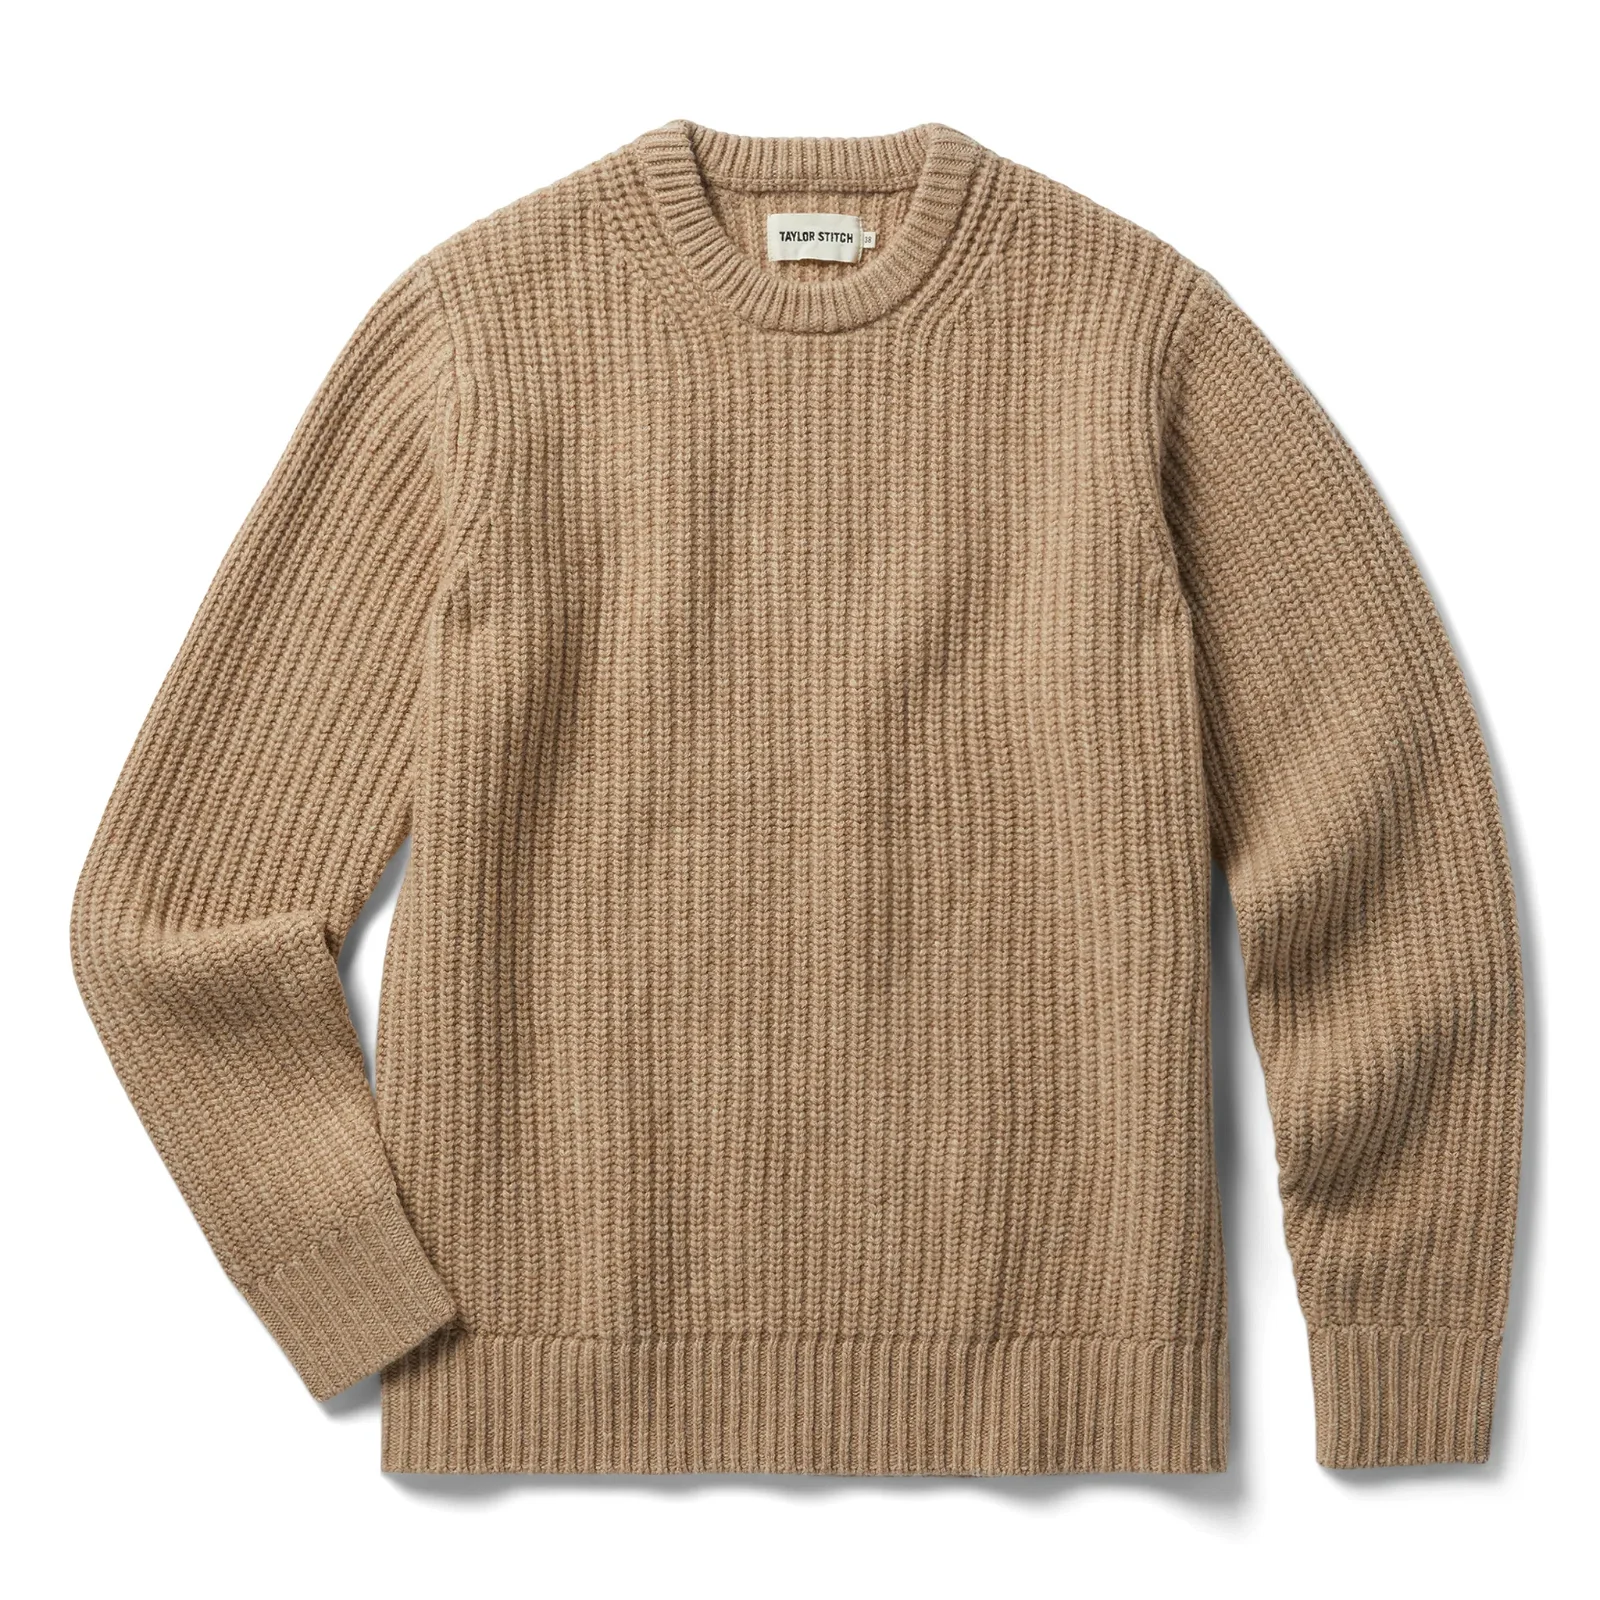 Image of The Fisherman Sweater in Camel